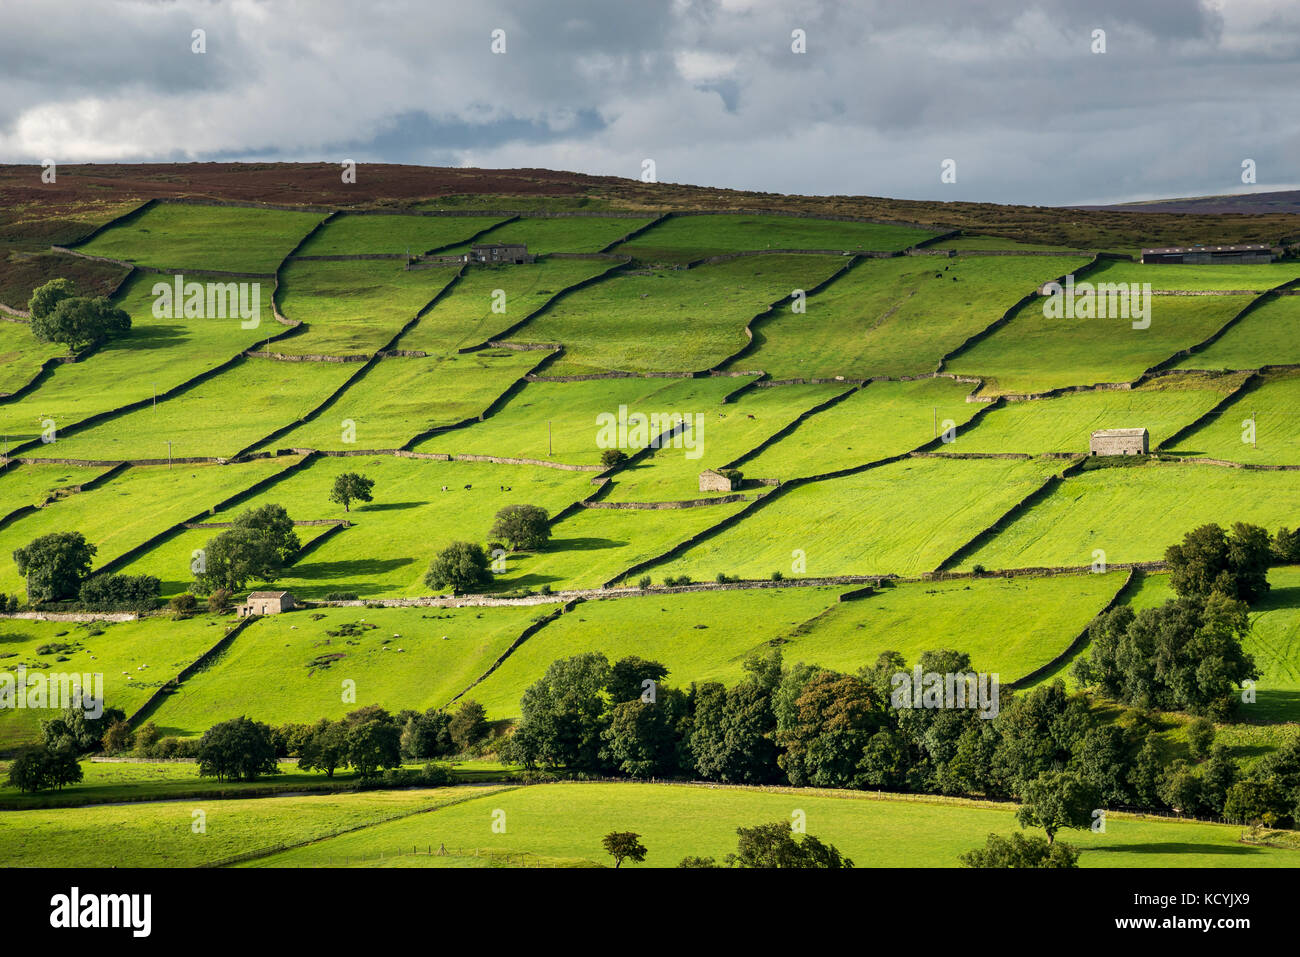 Pattern of vivid green fields near Reeth in Swaledale, Yorkshire Dales national park, England. Stock Photo